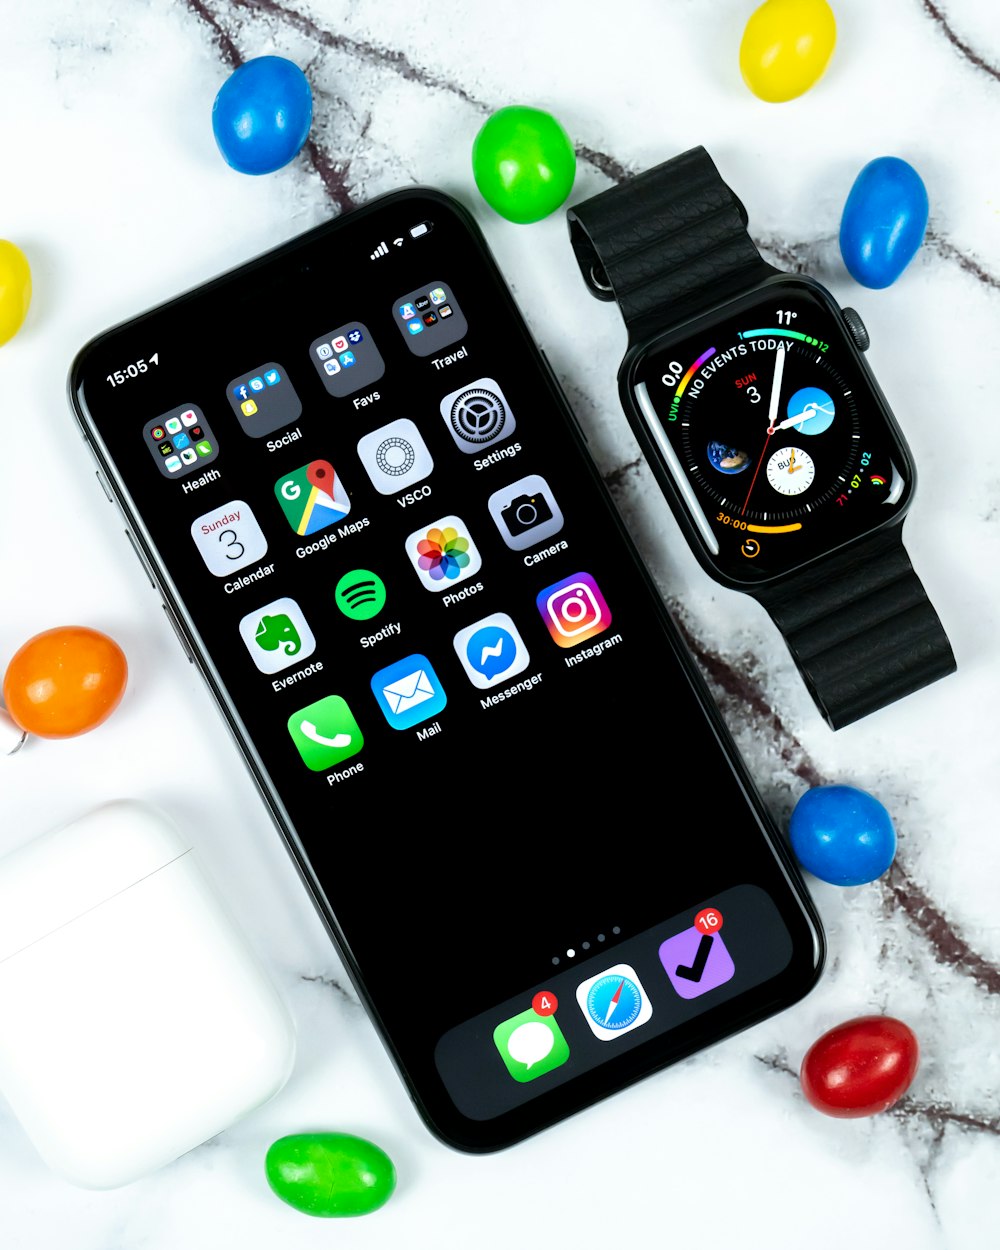 Apple Watch accanto all'iPhone